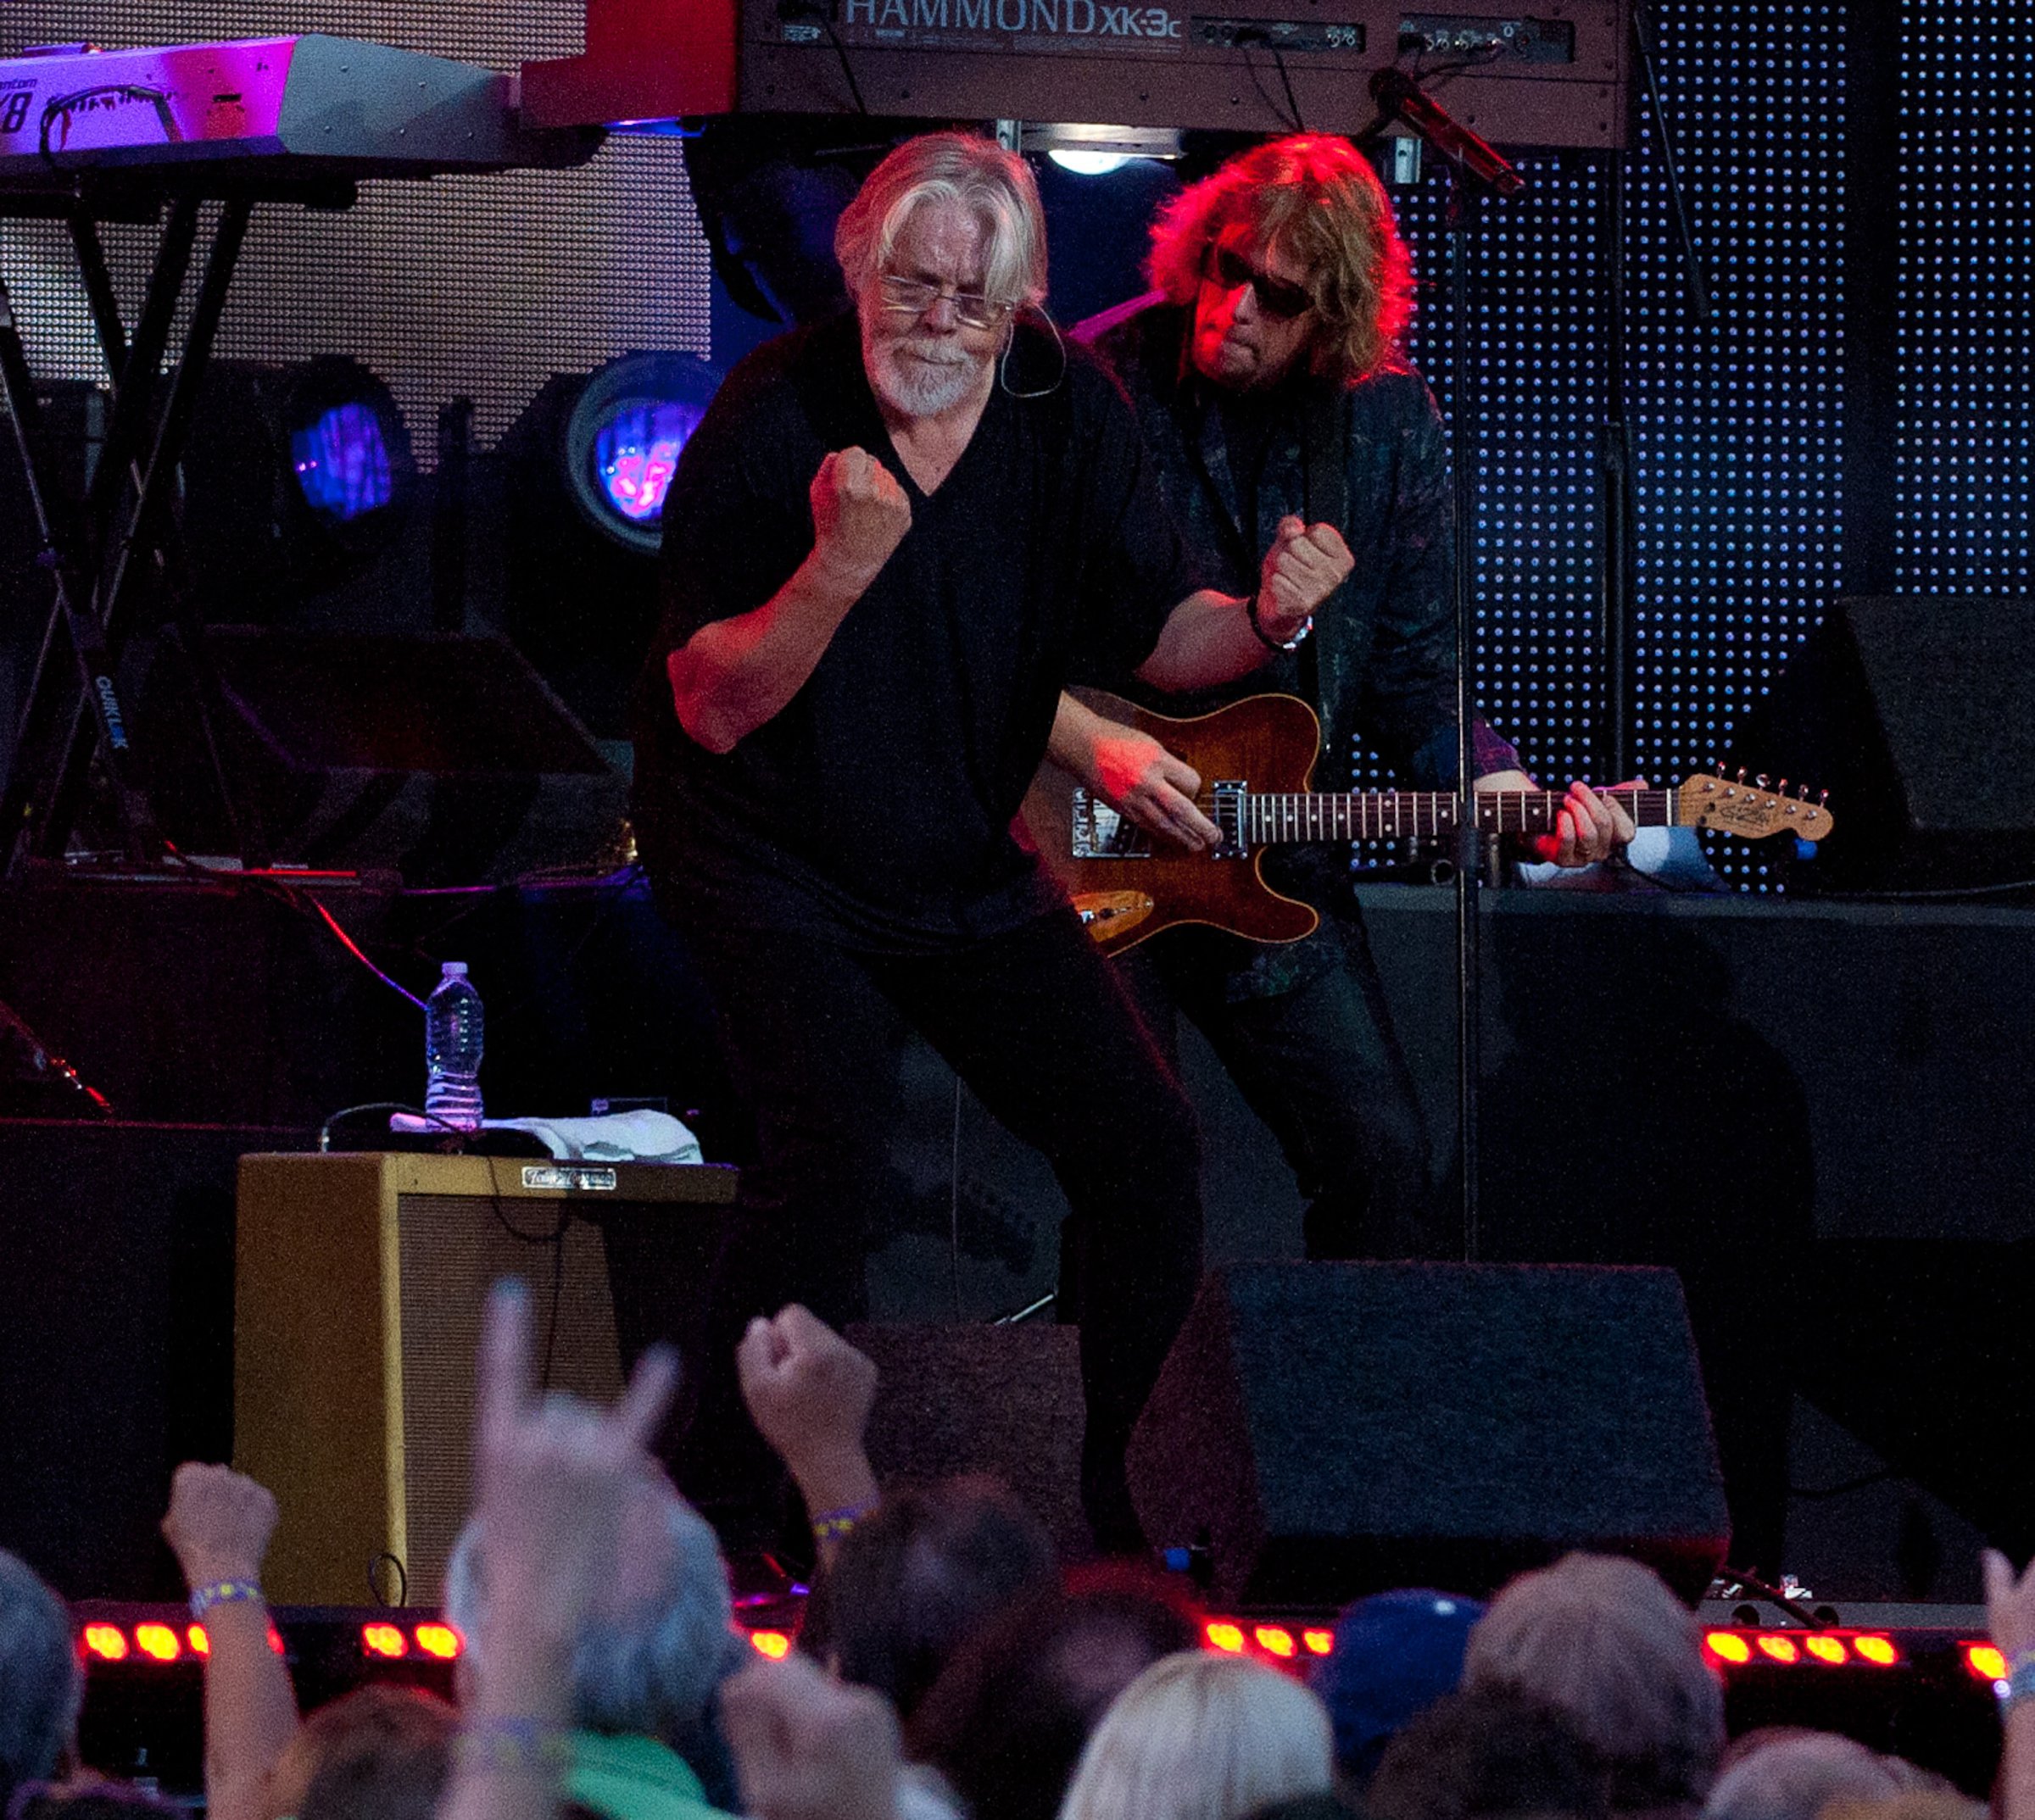 Bob Seger performing at 'Jimmy Kimmel Live' on Oct. 14, 2014 in Los Angeles, California.